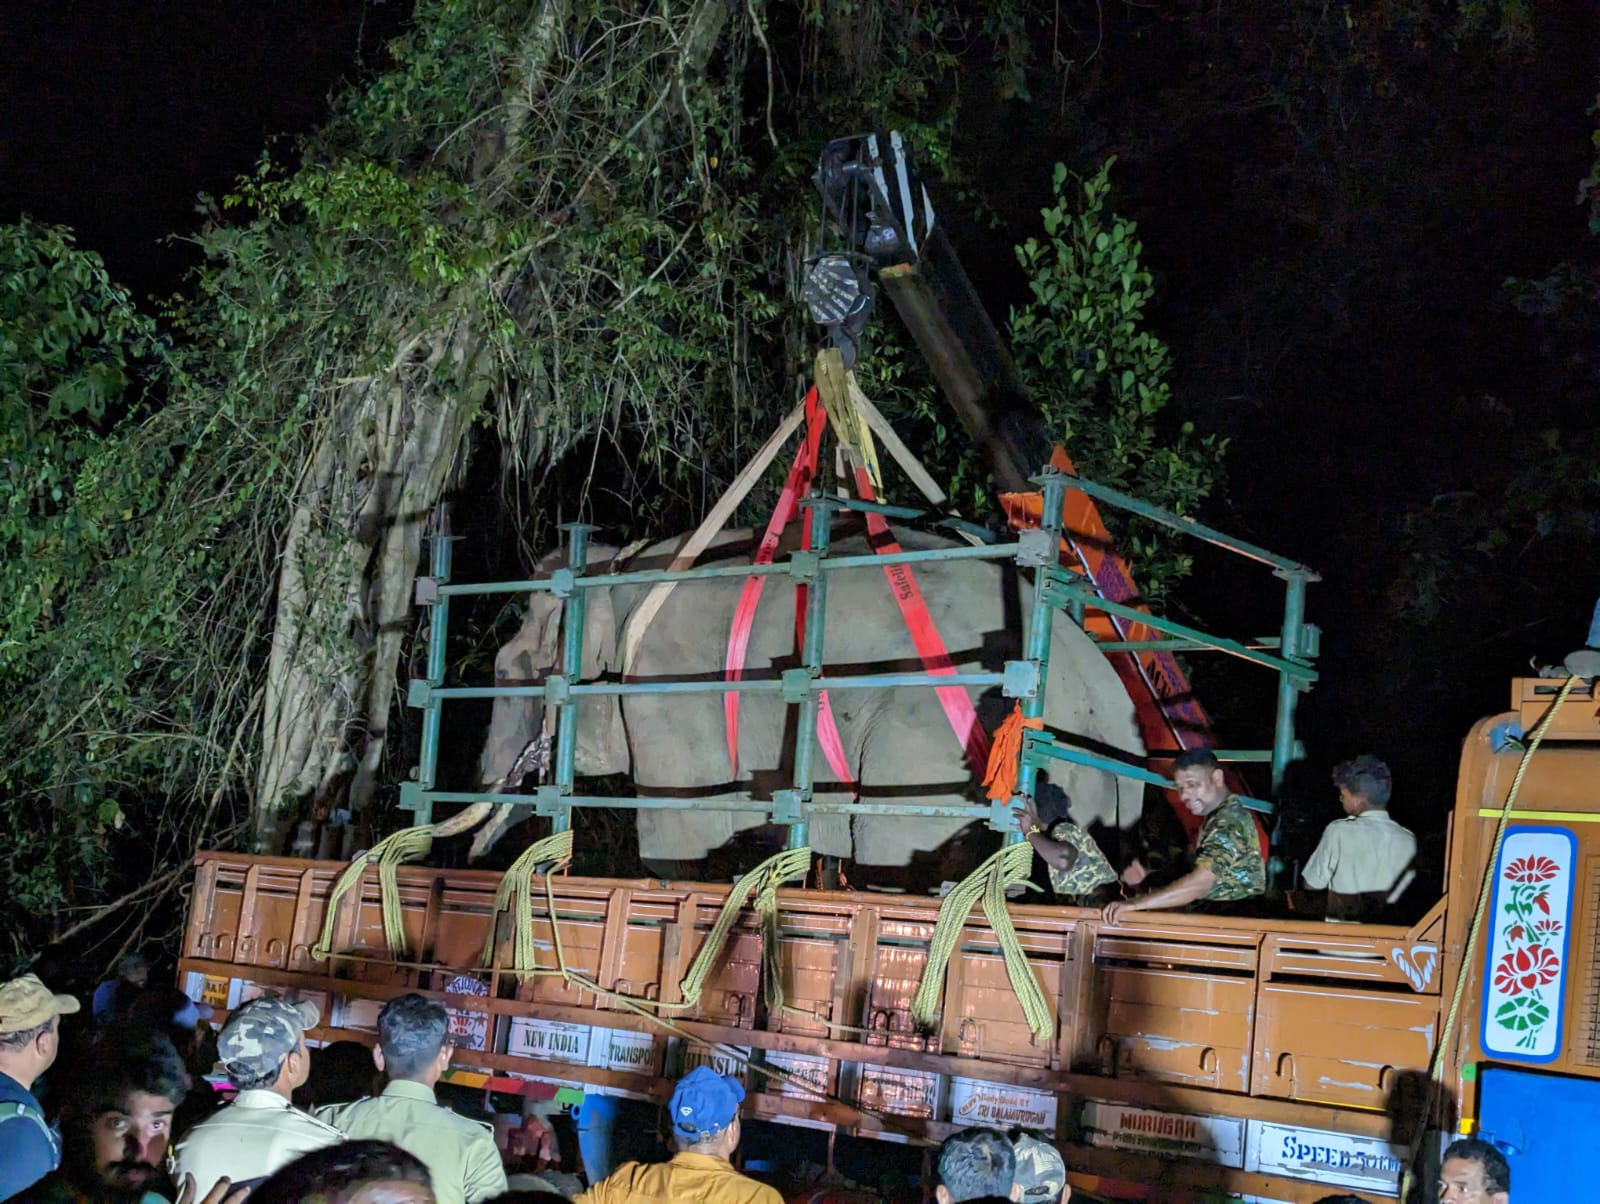 Caputured tusker getting shifted to a truck by a crane in Kadaba